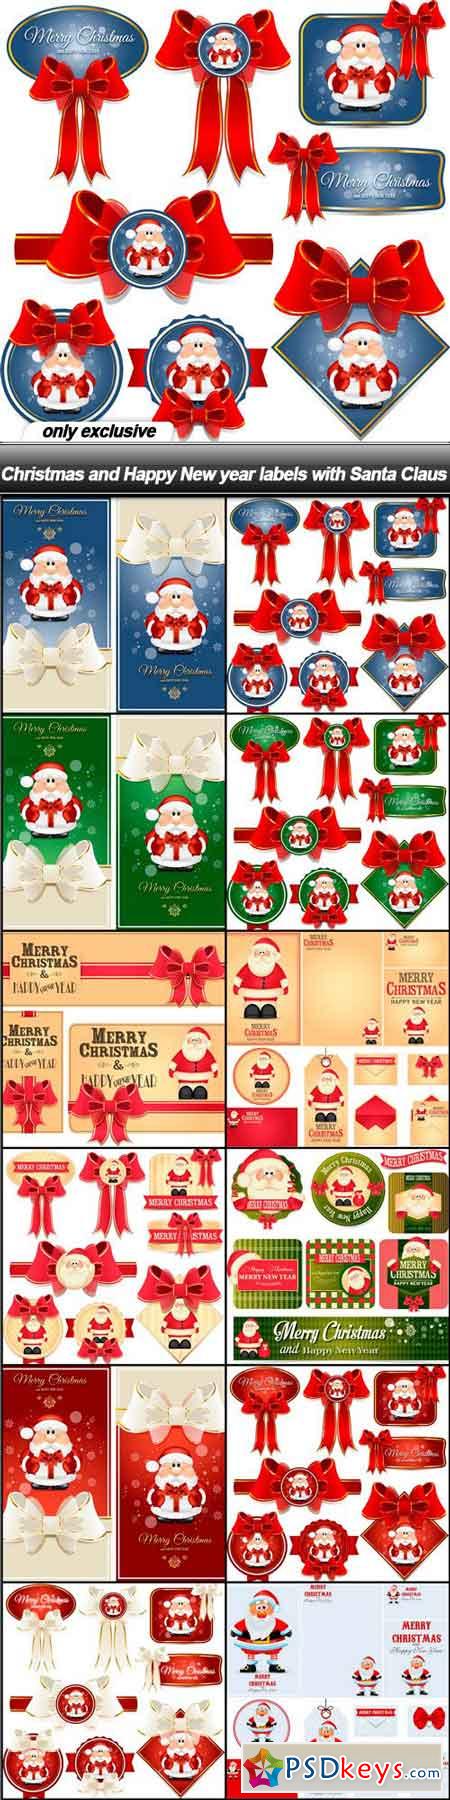 Christmas and Happy New year labels with Santa Claus - 12 EPS